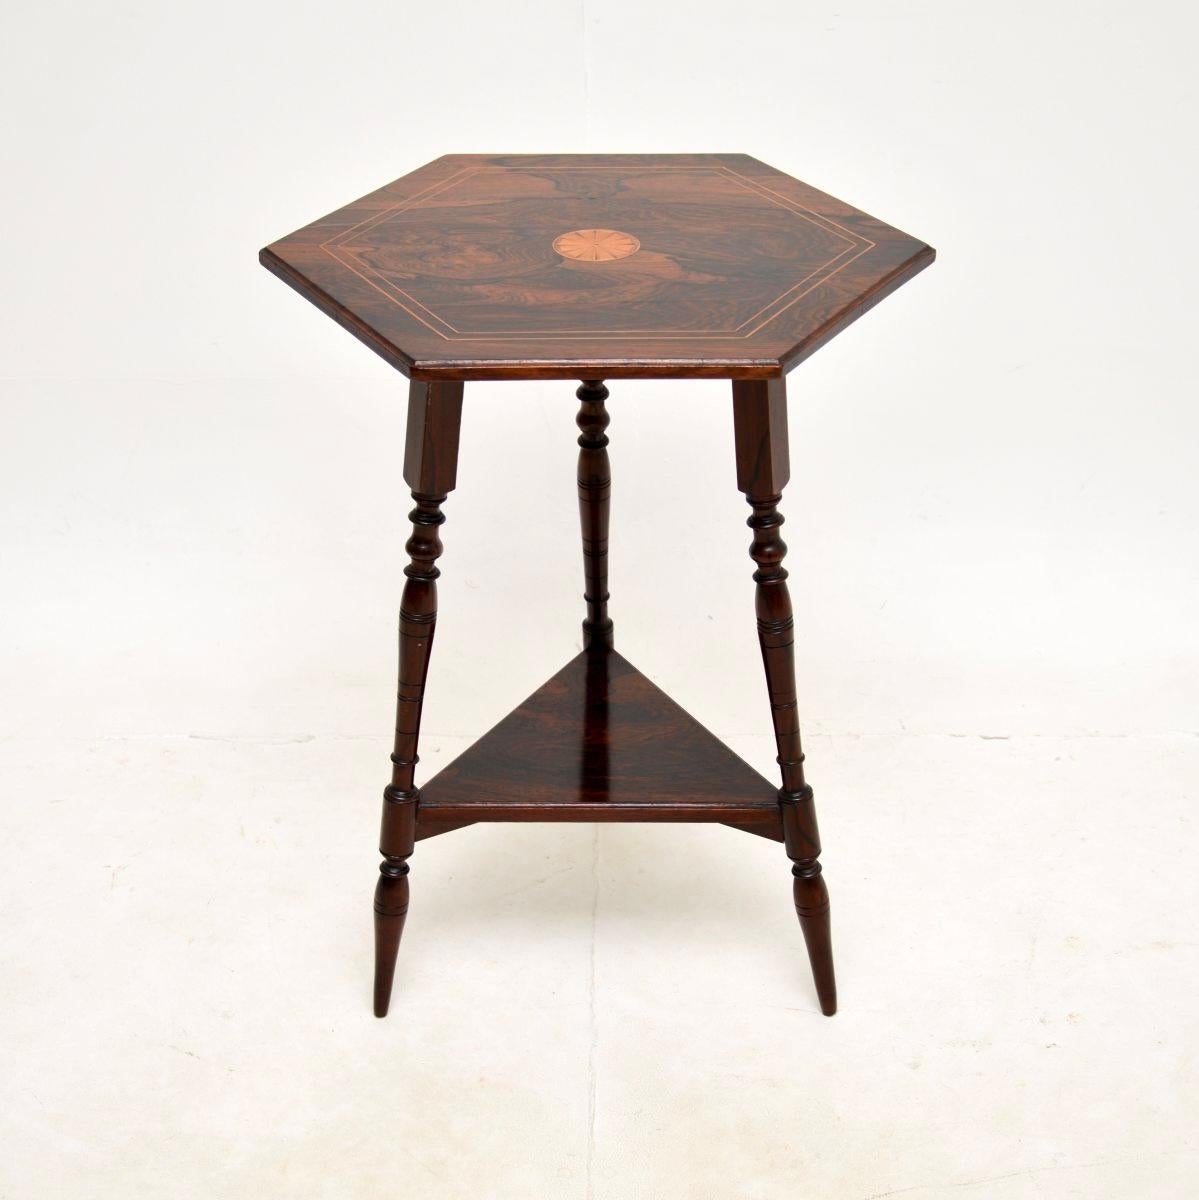 A lovely antique Victorian inlaid side table. This was made in England, it dates from around the 1890-1900 period.

It is of extremely fine quality and is a very useful size. The three legs are beautifully turned, they support an octagonal top which